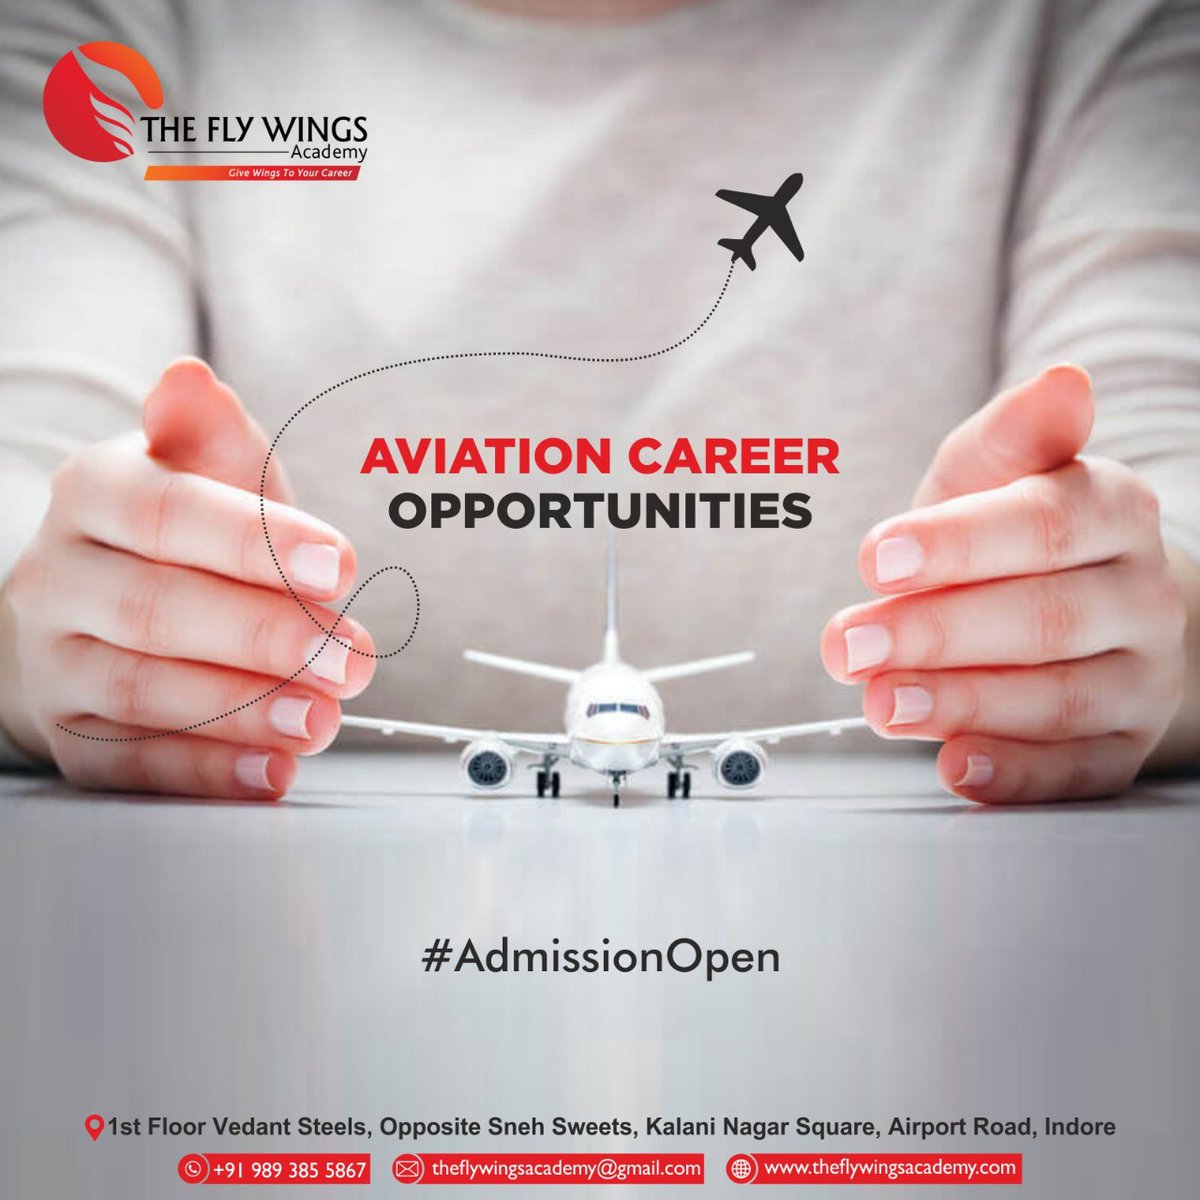 Are you ready for your dream career?
Because we make your dreams come true!!
Learn from experience people in the industry and grow exponentially!!
For more information contact +91-9893855867 or visit our academy
#Theflywingsacademy #admissionopen2020 #indore #aviation